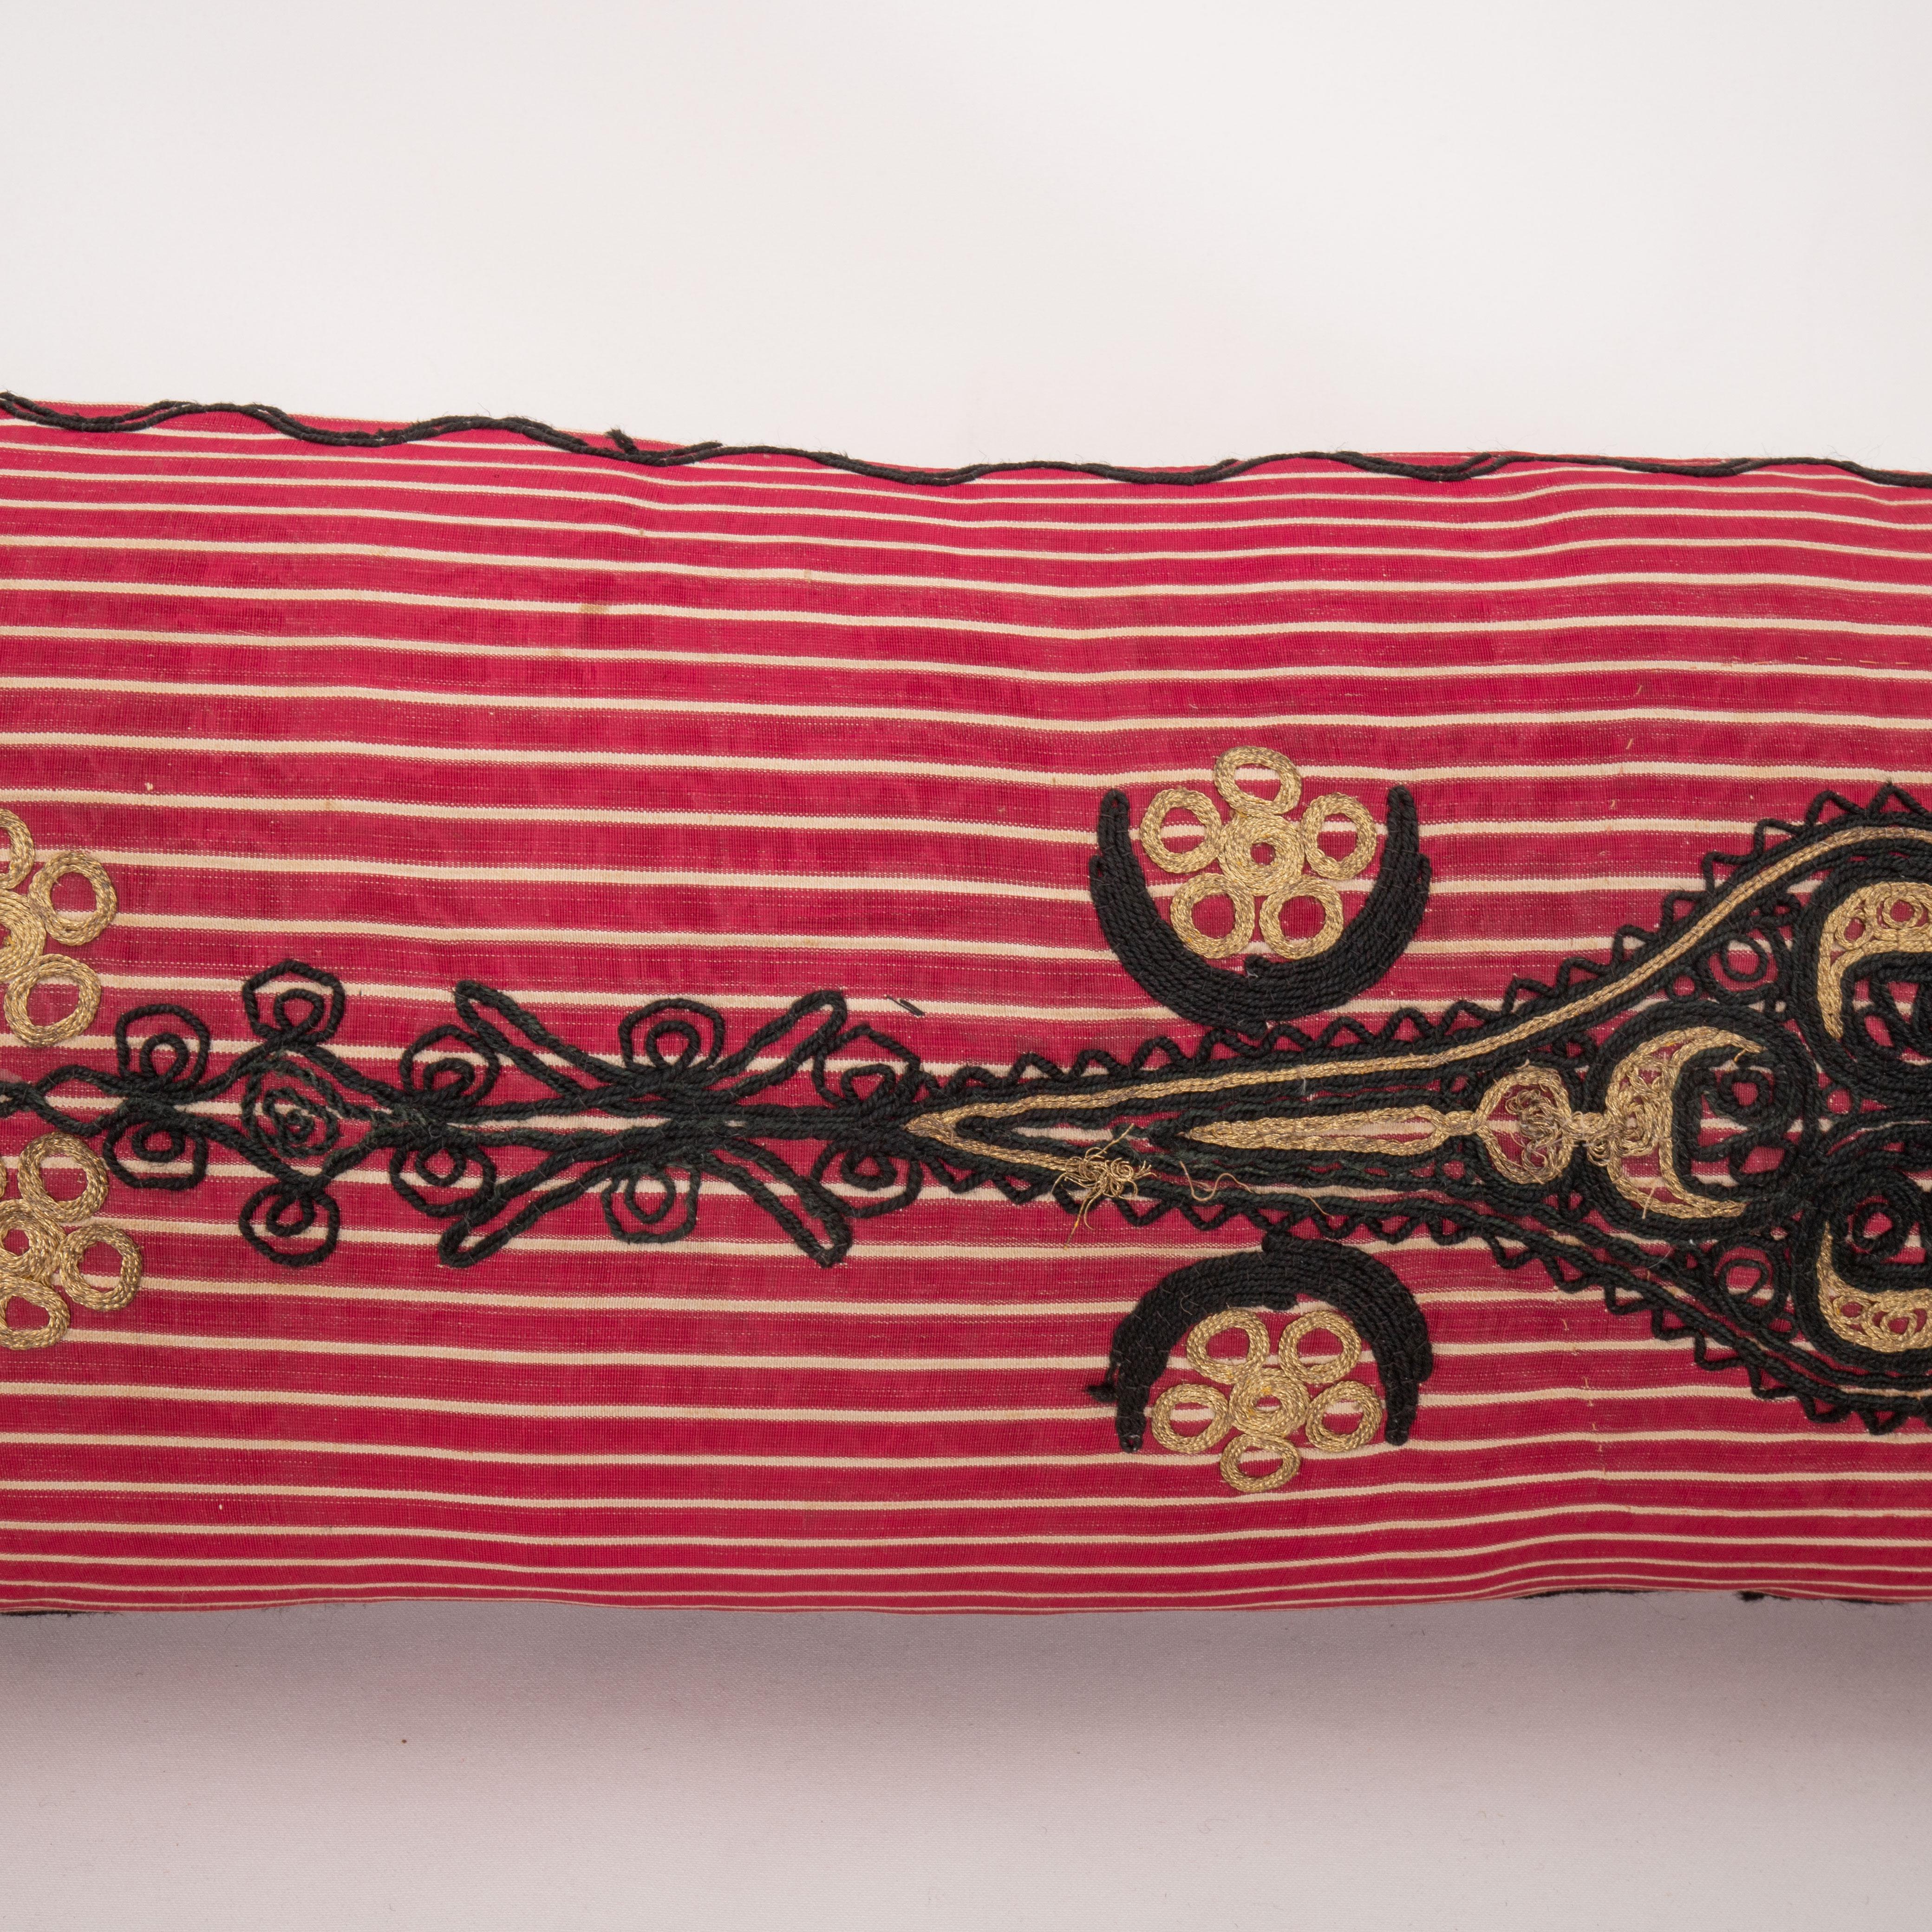 Embroidered Antique Ottoman Turkish Pillow Case, Early 20th C. For Sale